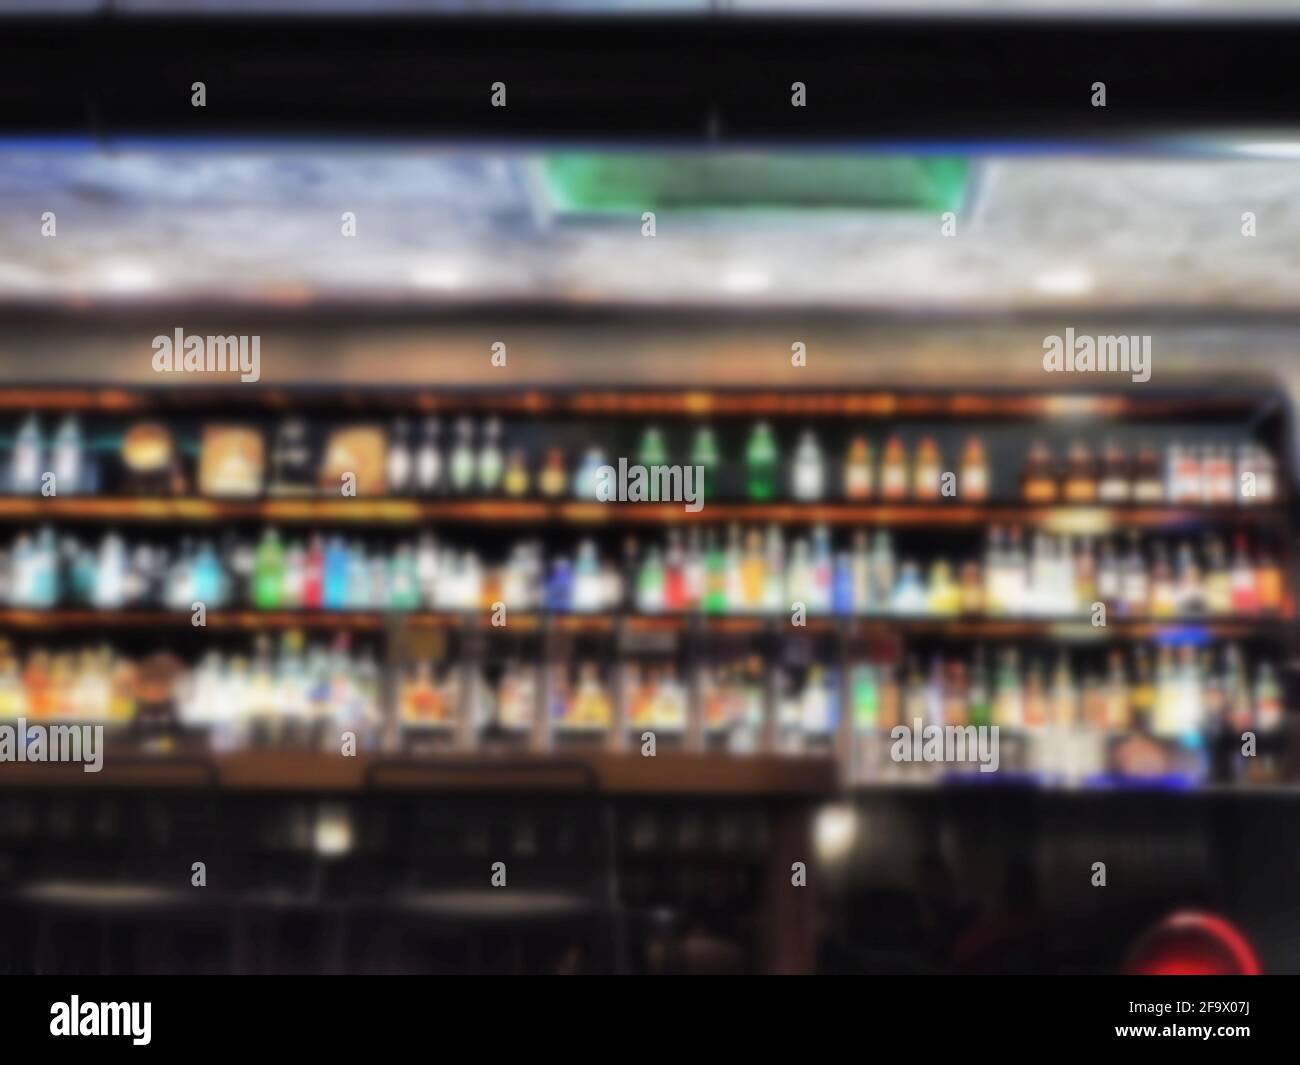 Blurred shot of a bar showing counters full of various drinks and chairs near a wooden table Stock Photo